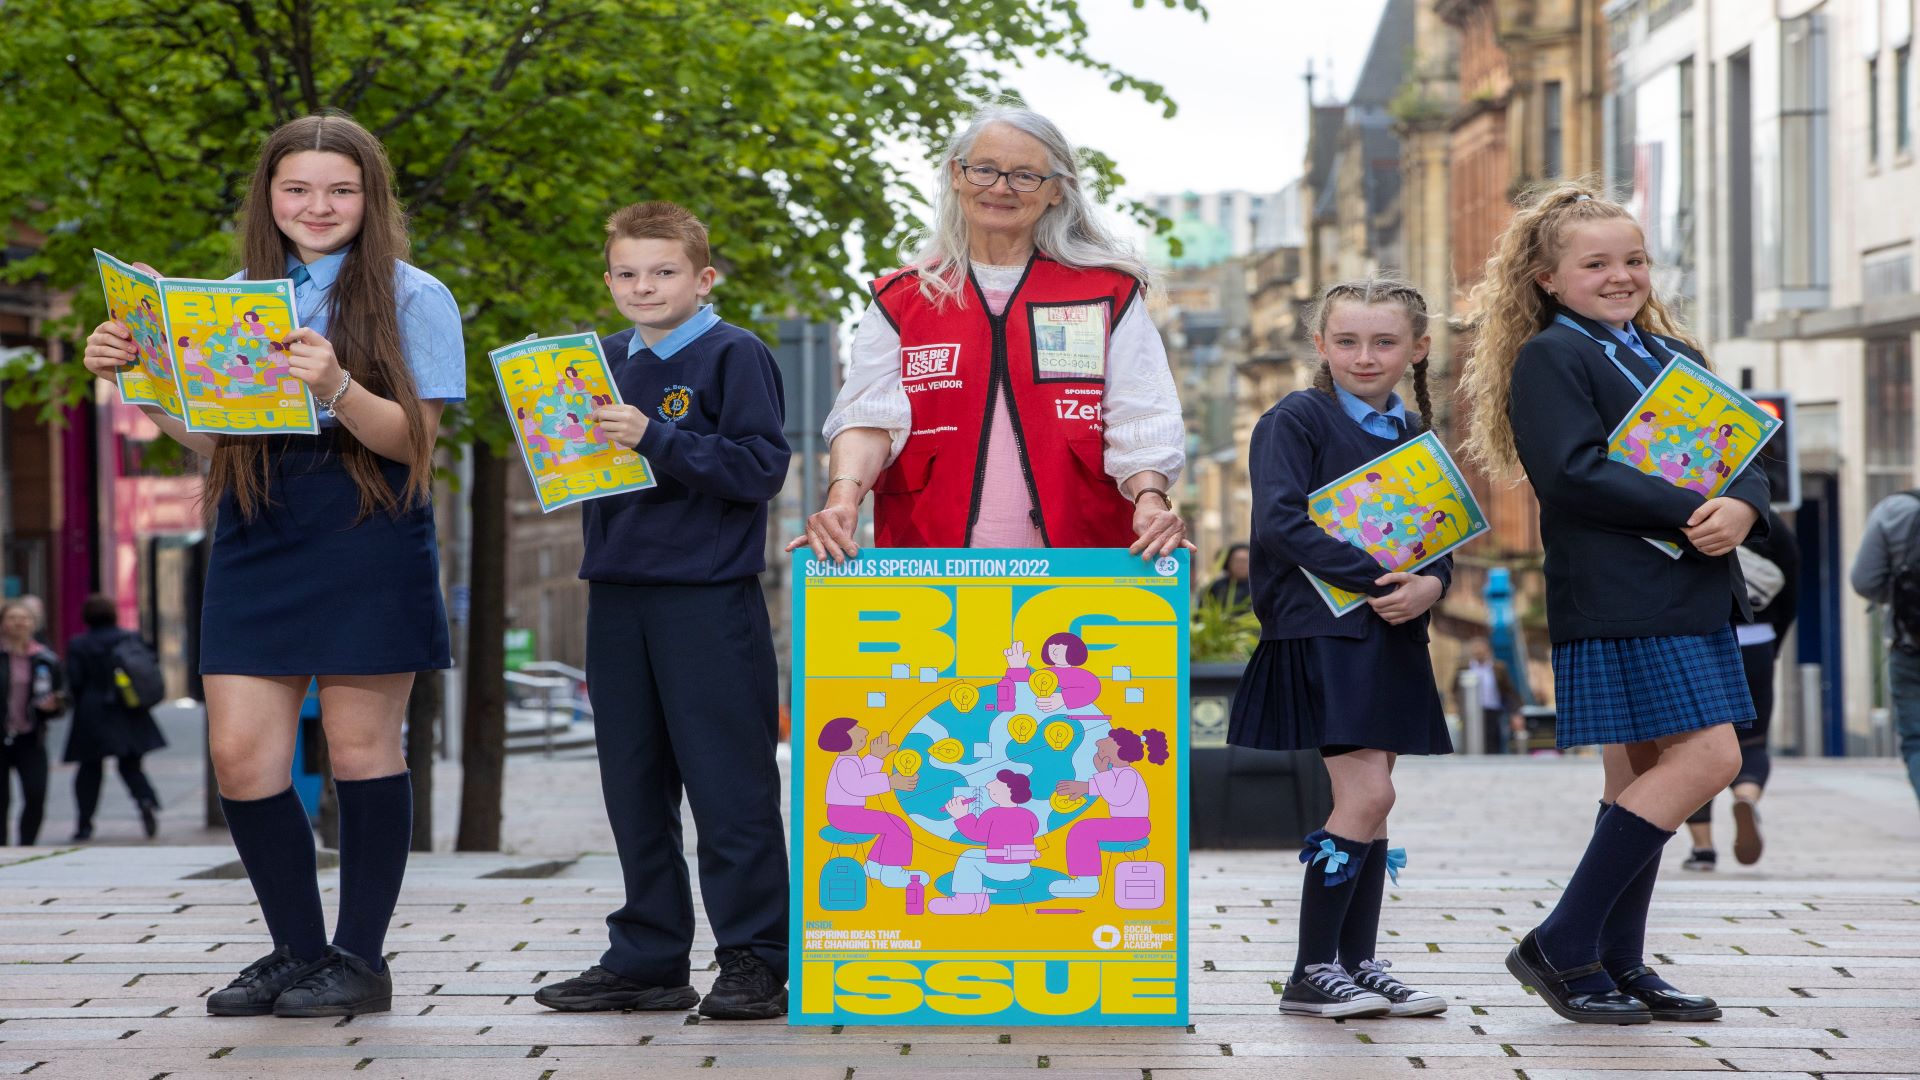 Pupil’s from St Bernard’s Primary School in Glasgow celebrate the special edition of The Big Issue in partnership with Social Enterprise Academy, with Big Issue vendor, Anabel – image Jeff Holmes